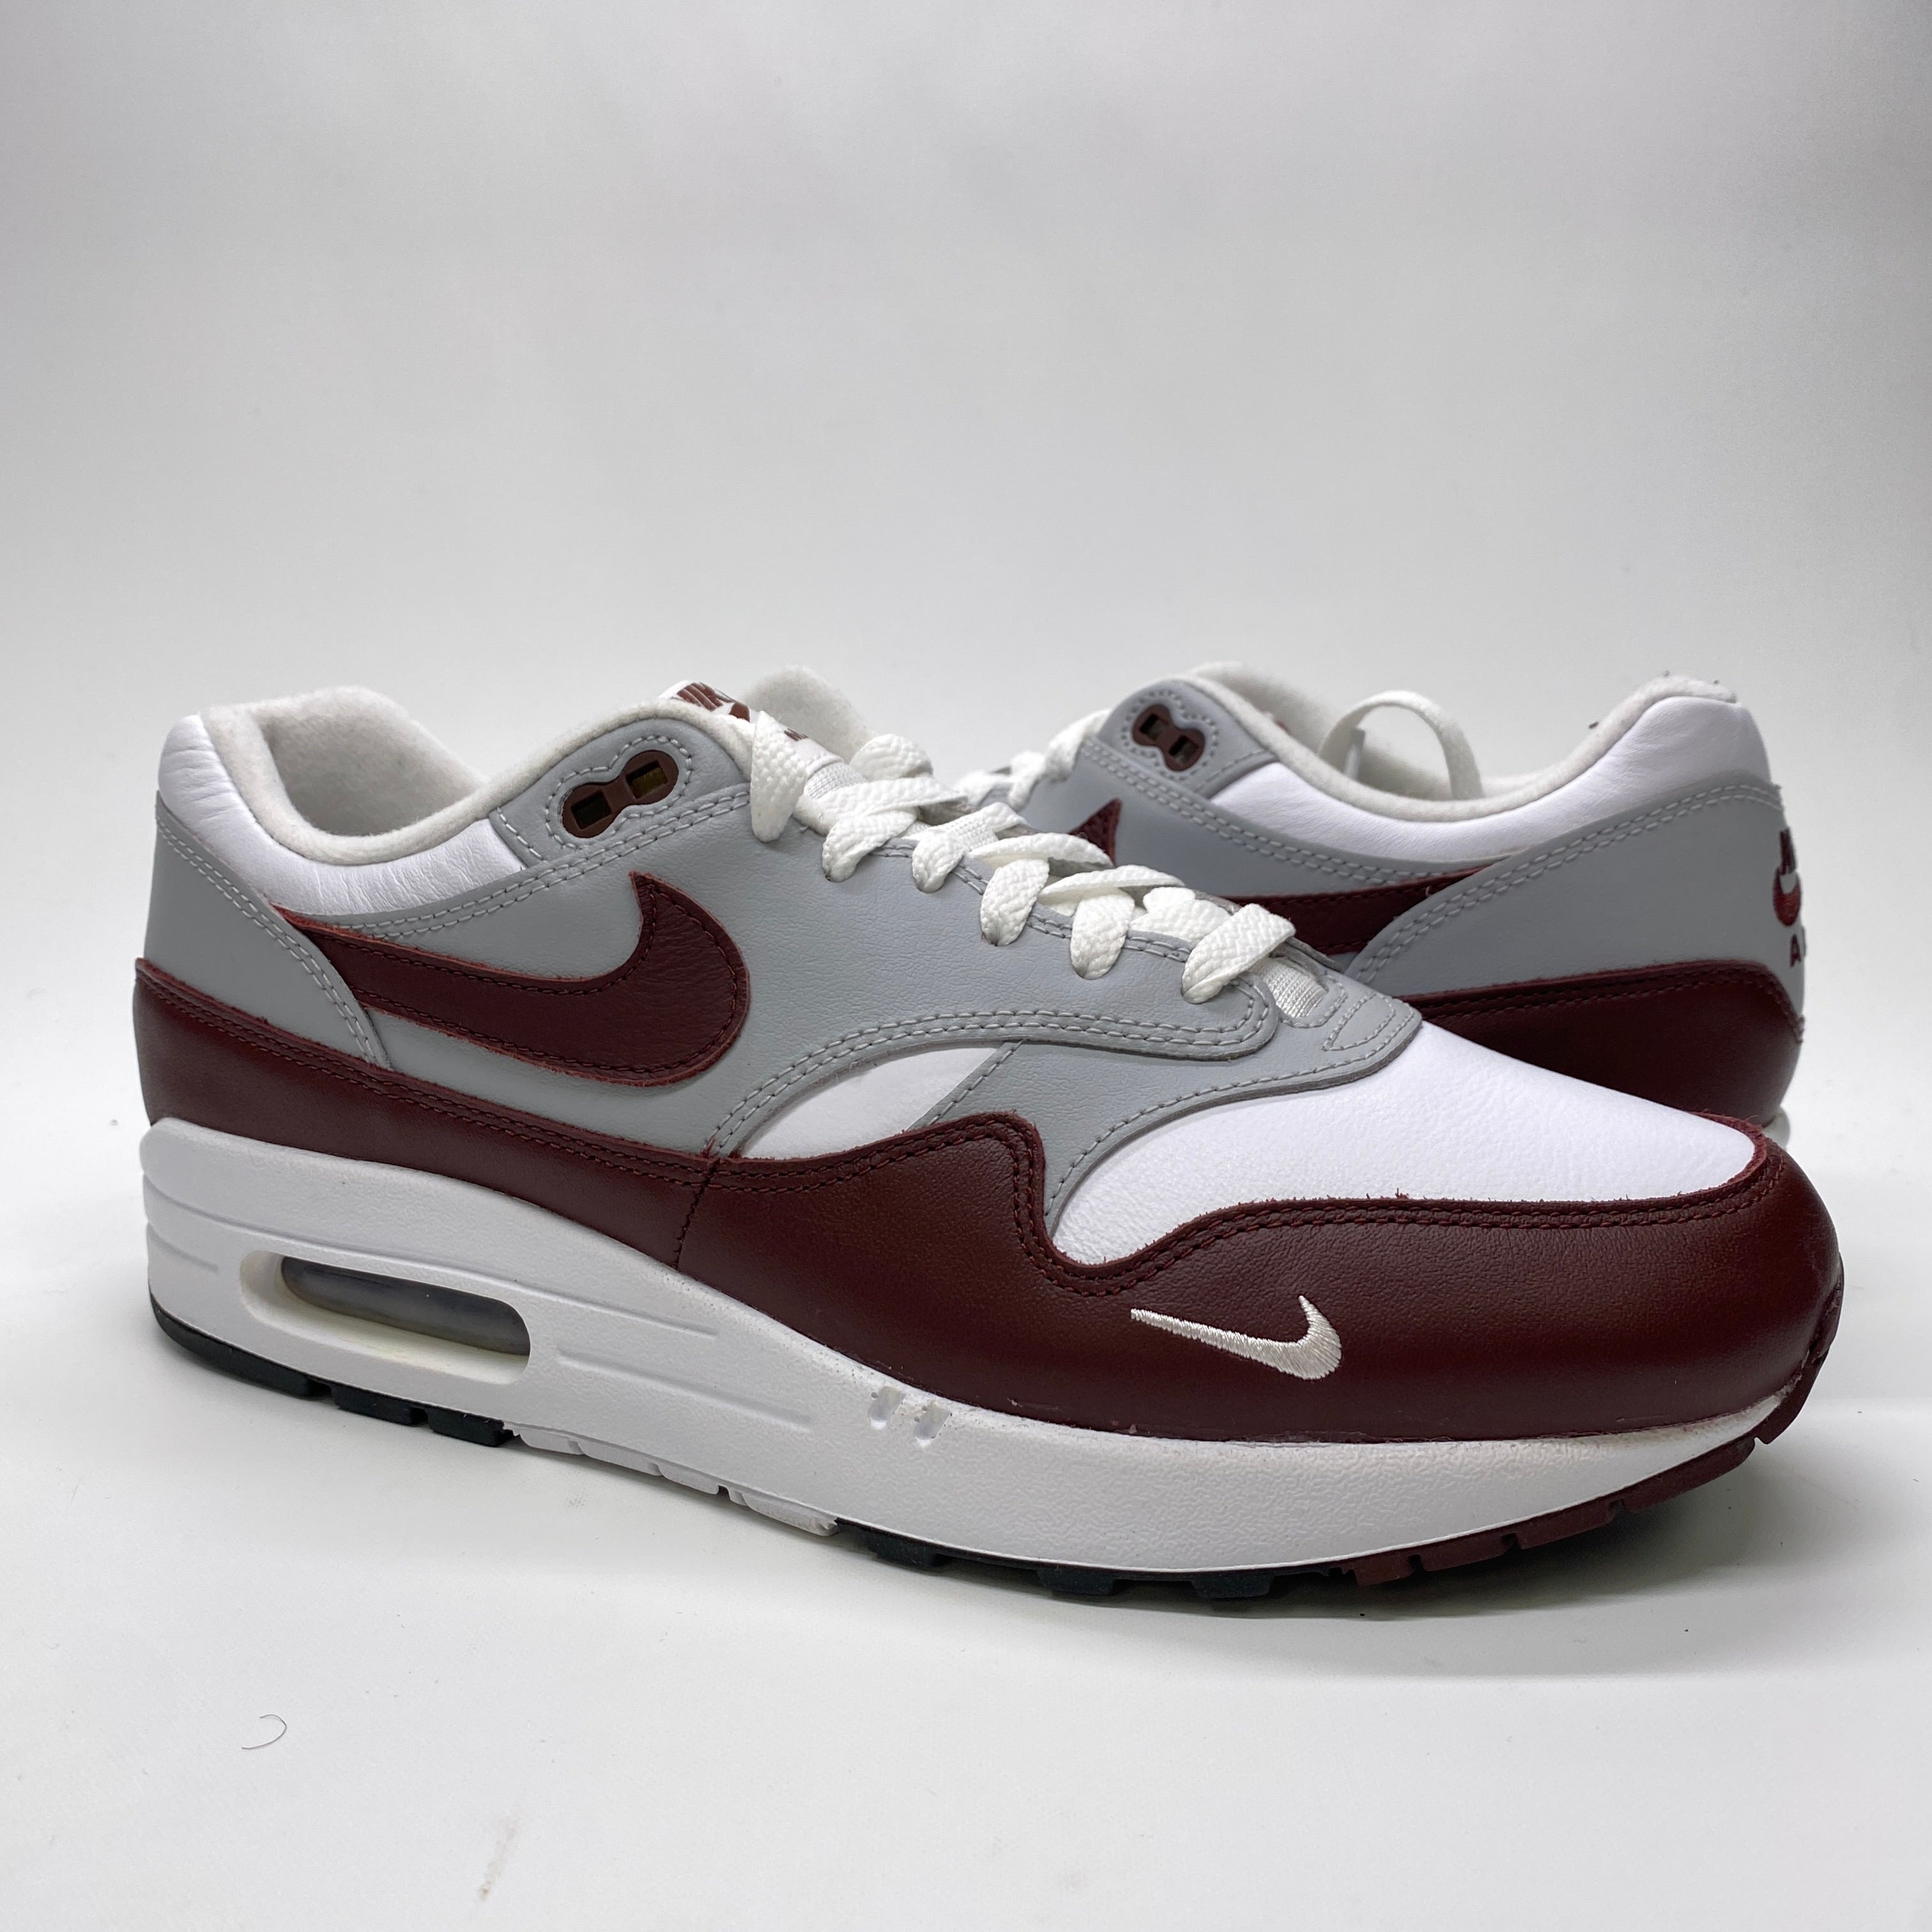 Nike Air Max 1 &quot;Mystic Dates&quot; 2020 Used Size 9.5